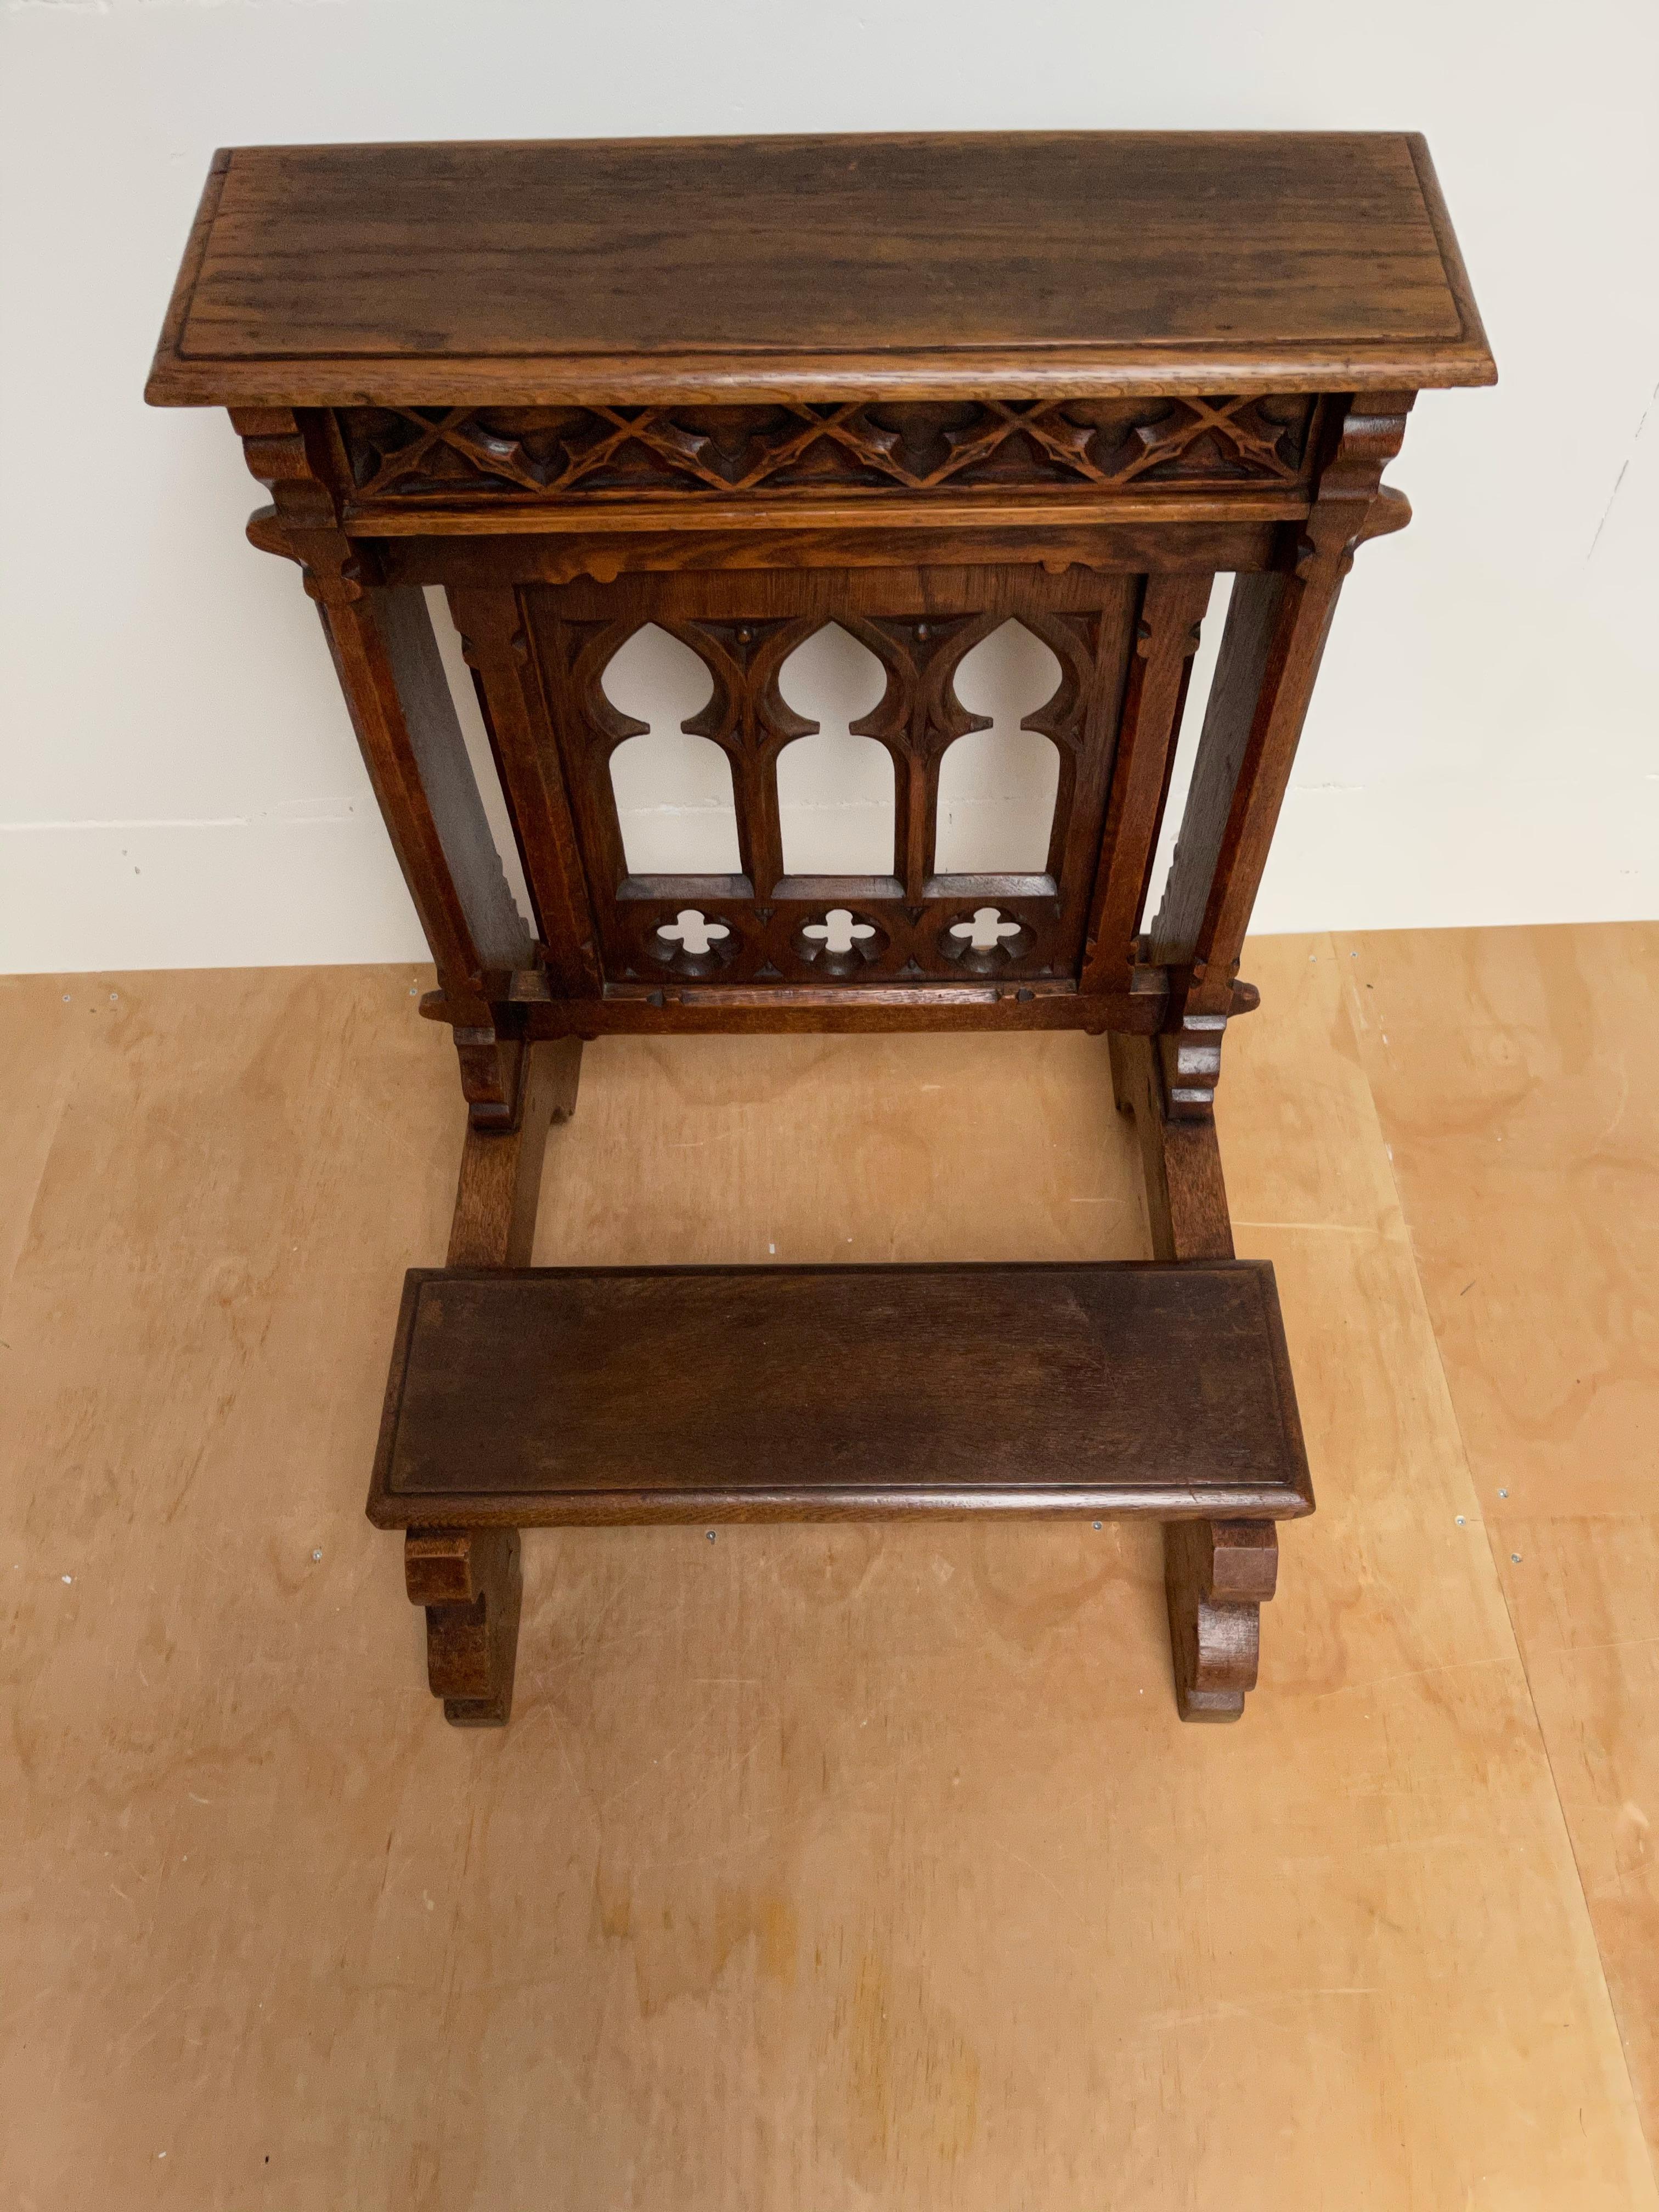 Wonderful antique church stool for silent prayers.

This Gothic style church relic has been in use for well over one hundred years and it still looks incredibly beautiful. It is clear that this piece of antique church furniture has been very well